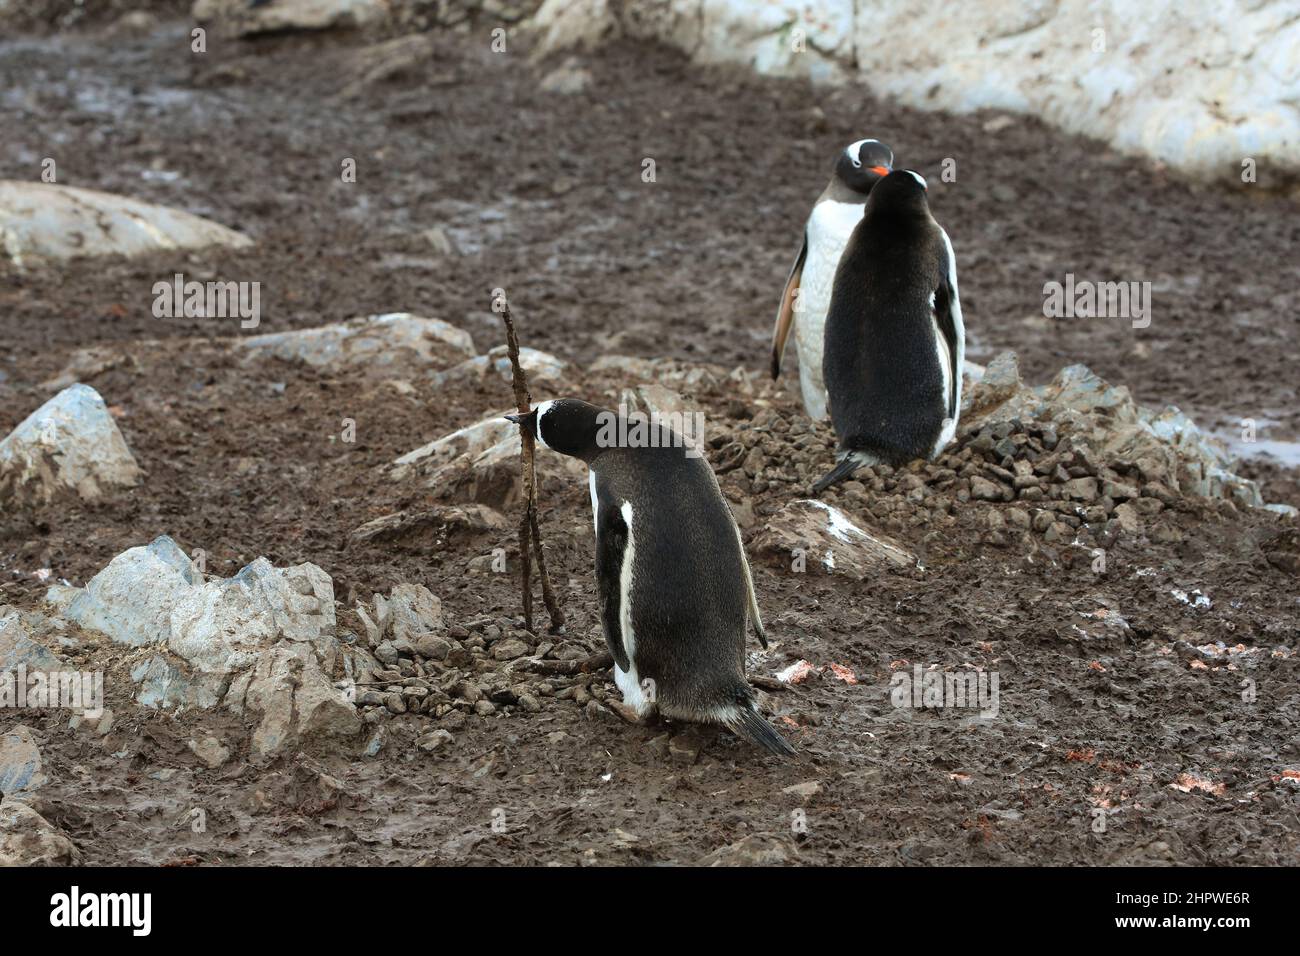 A Gentoo penguin is using a wood stick to build its nest at the González Videla Station (Chilean Base) in Antarctica. Stock Photo